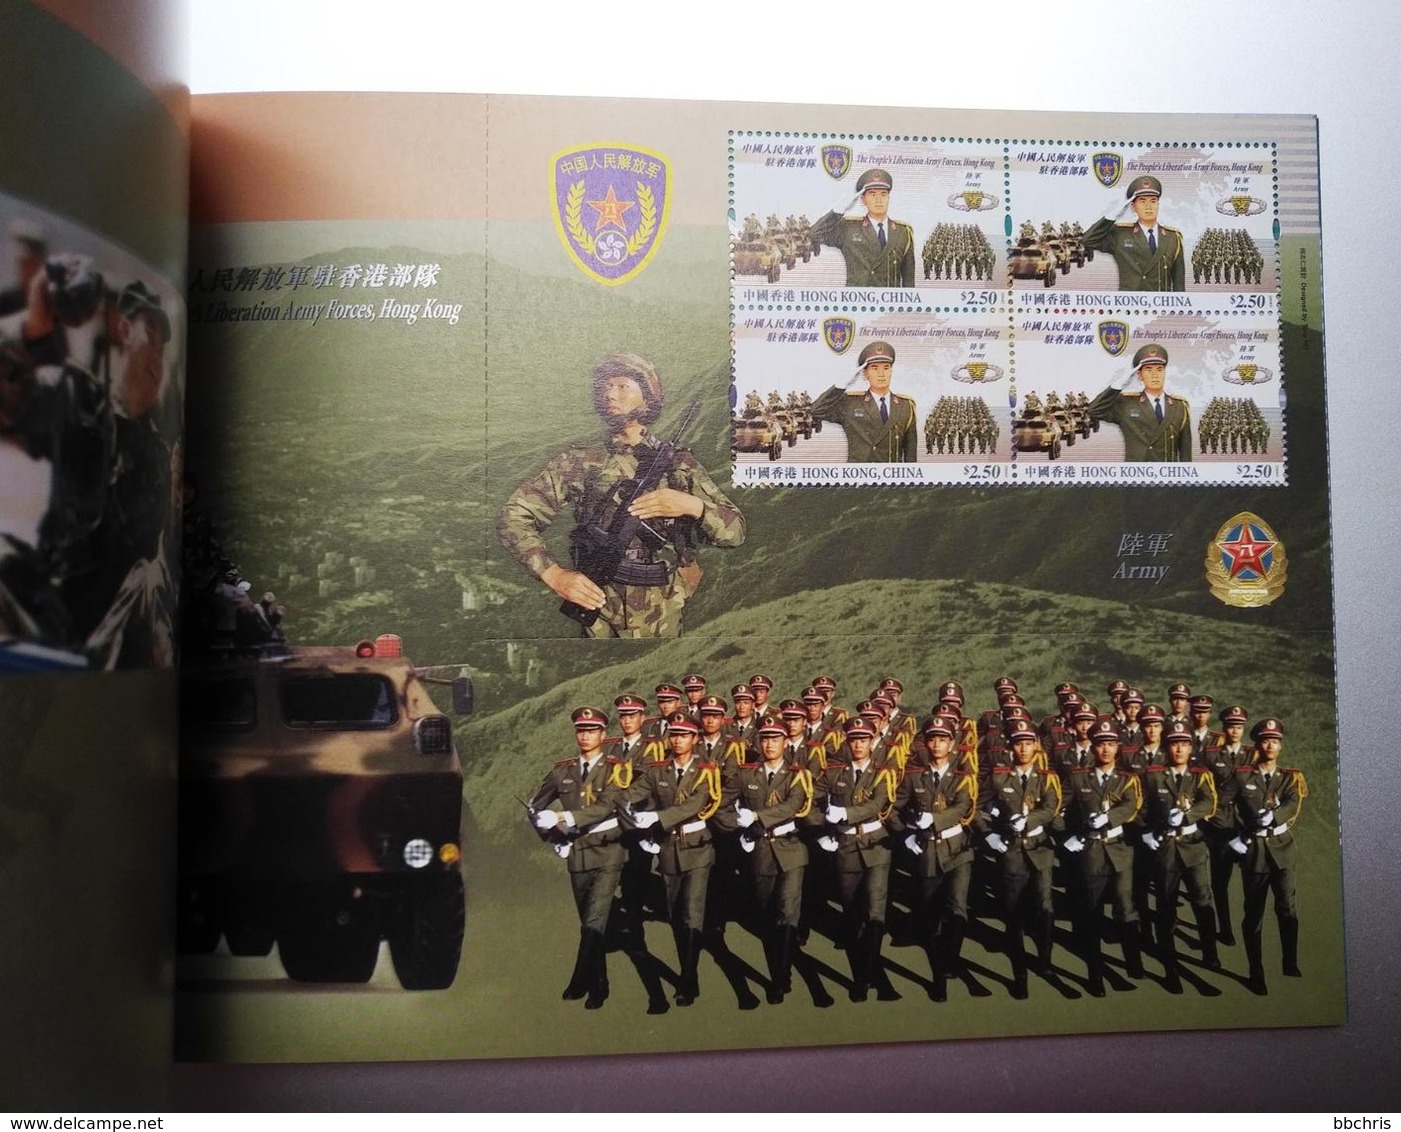 China Hong Kong 2004 the People's Liberation Army Forces stamp booklet MNH